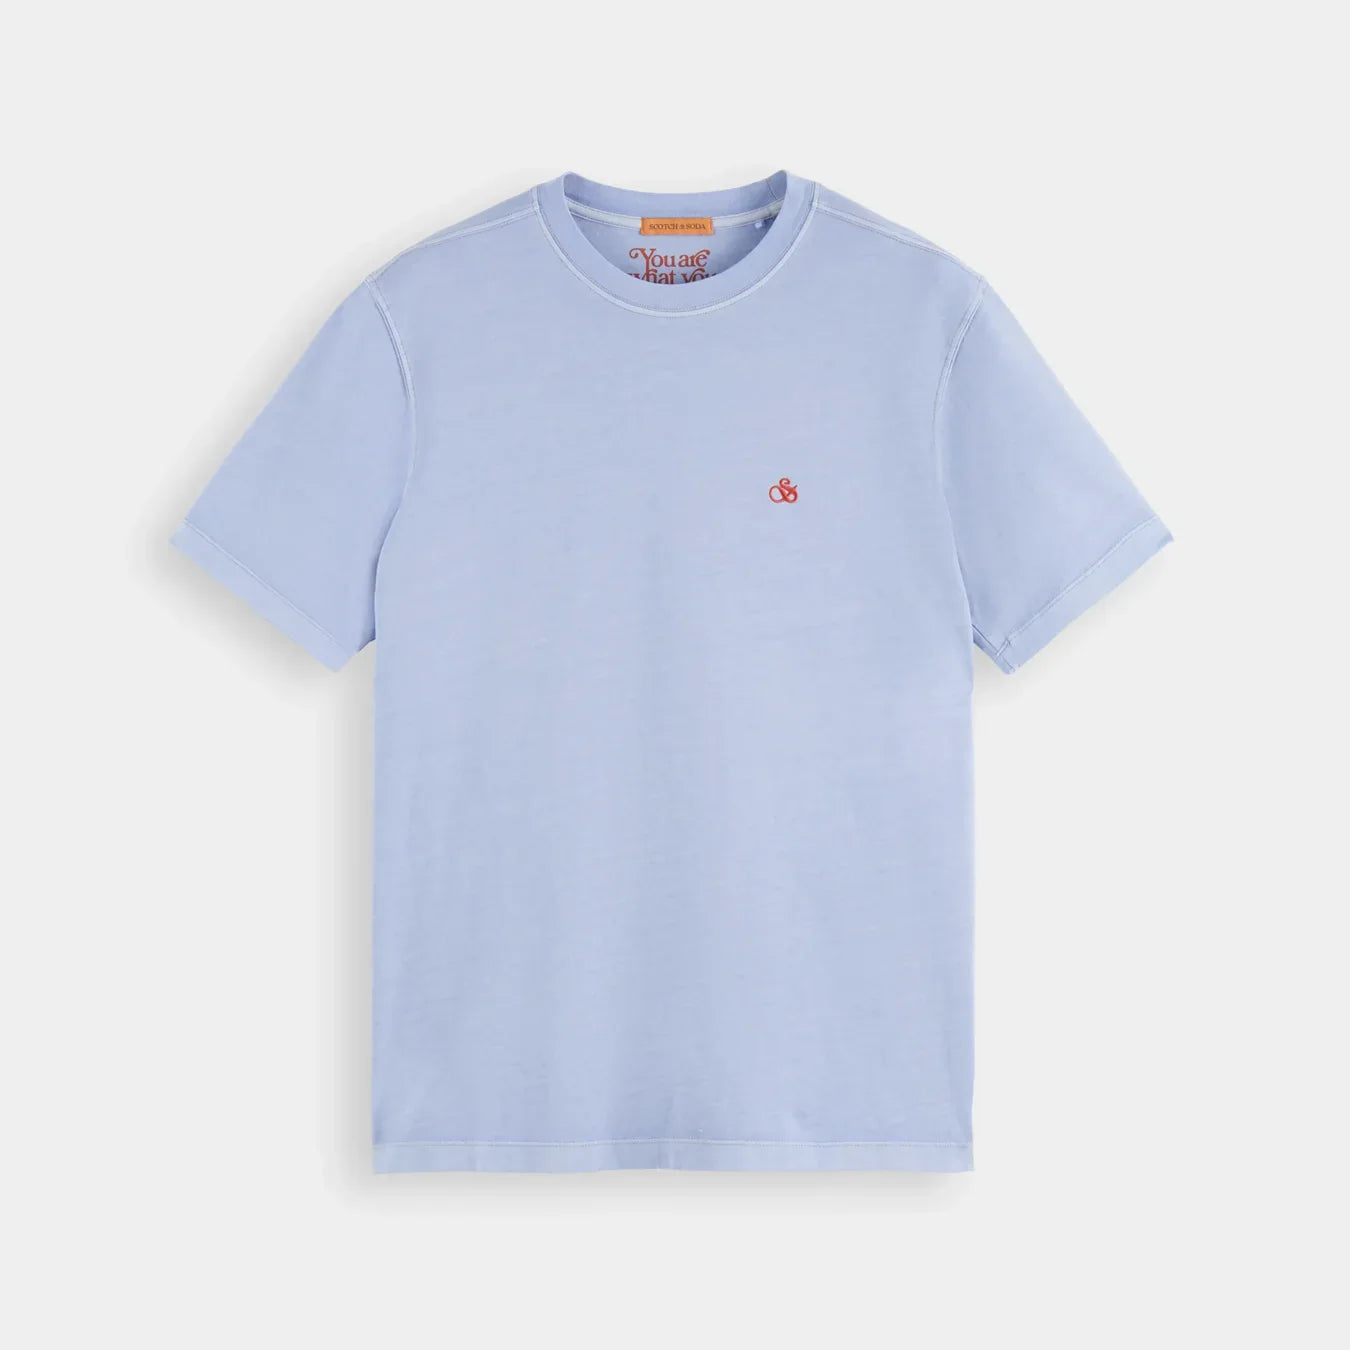 'Scotch & Soda Garment-Dyed Jersey T-Shirt' in 'Twilight' colour